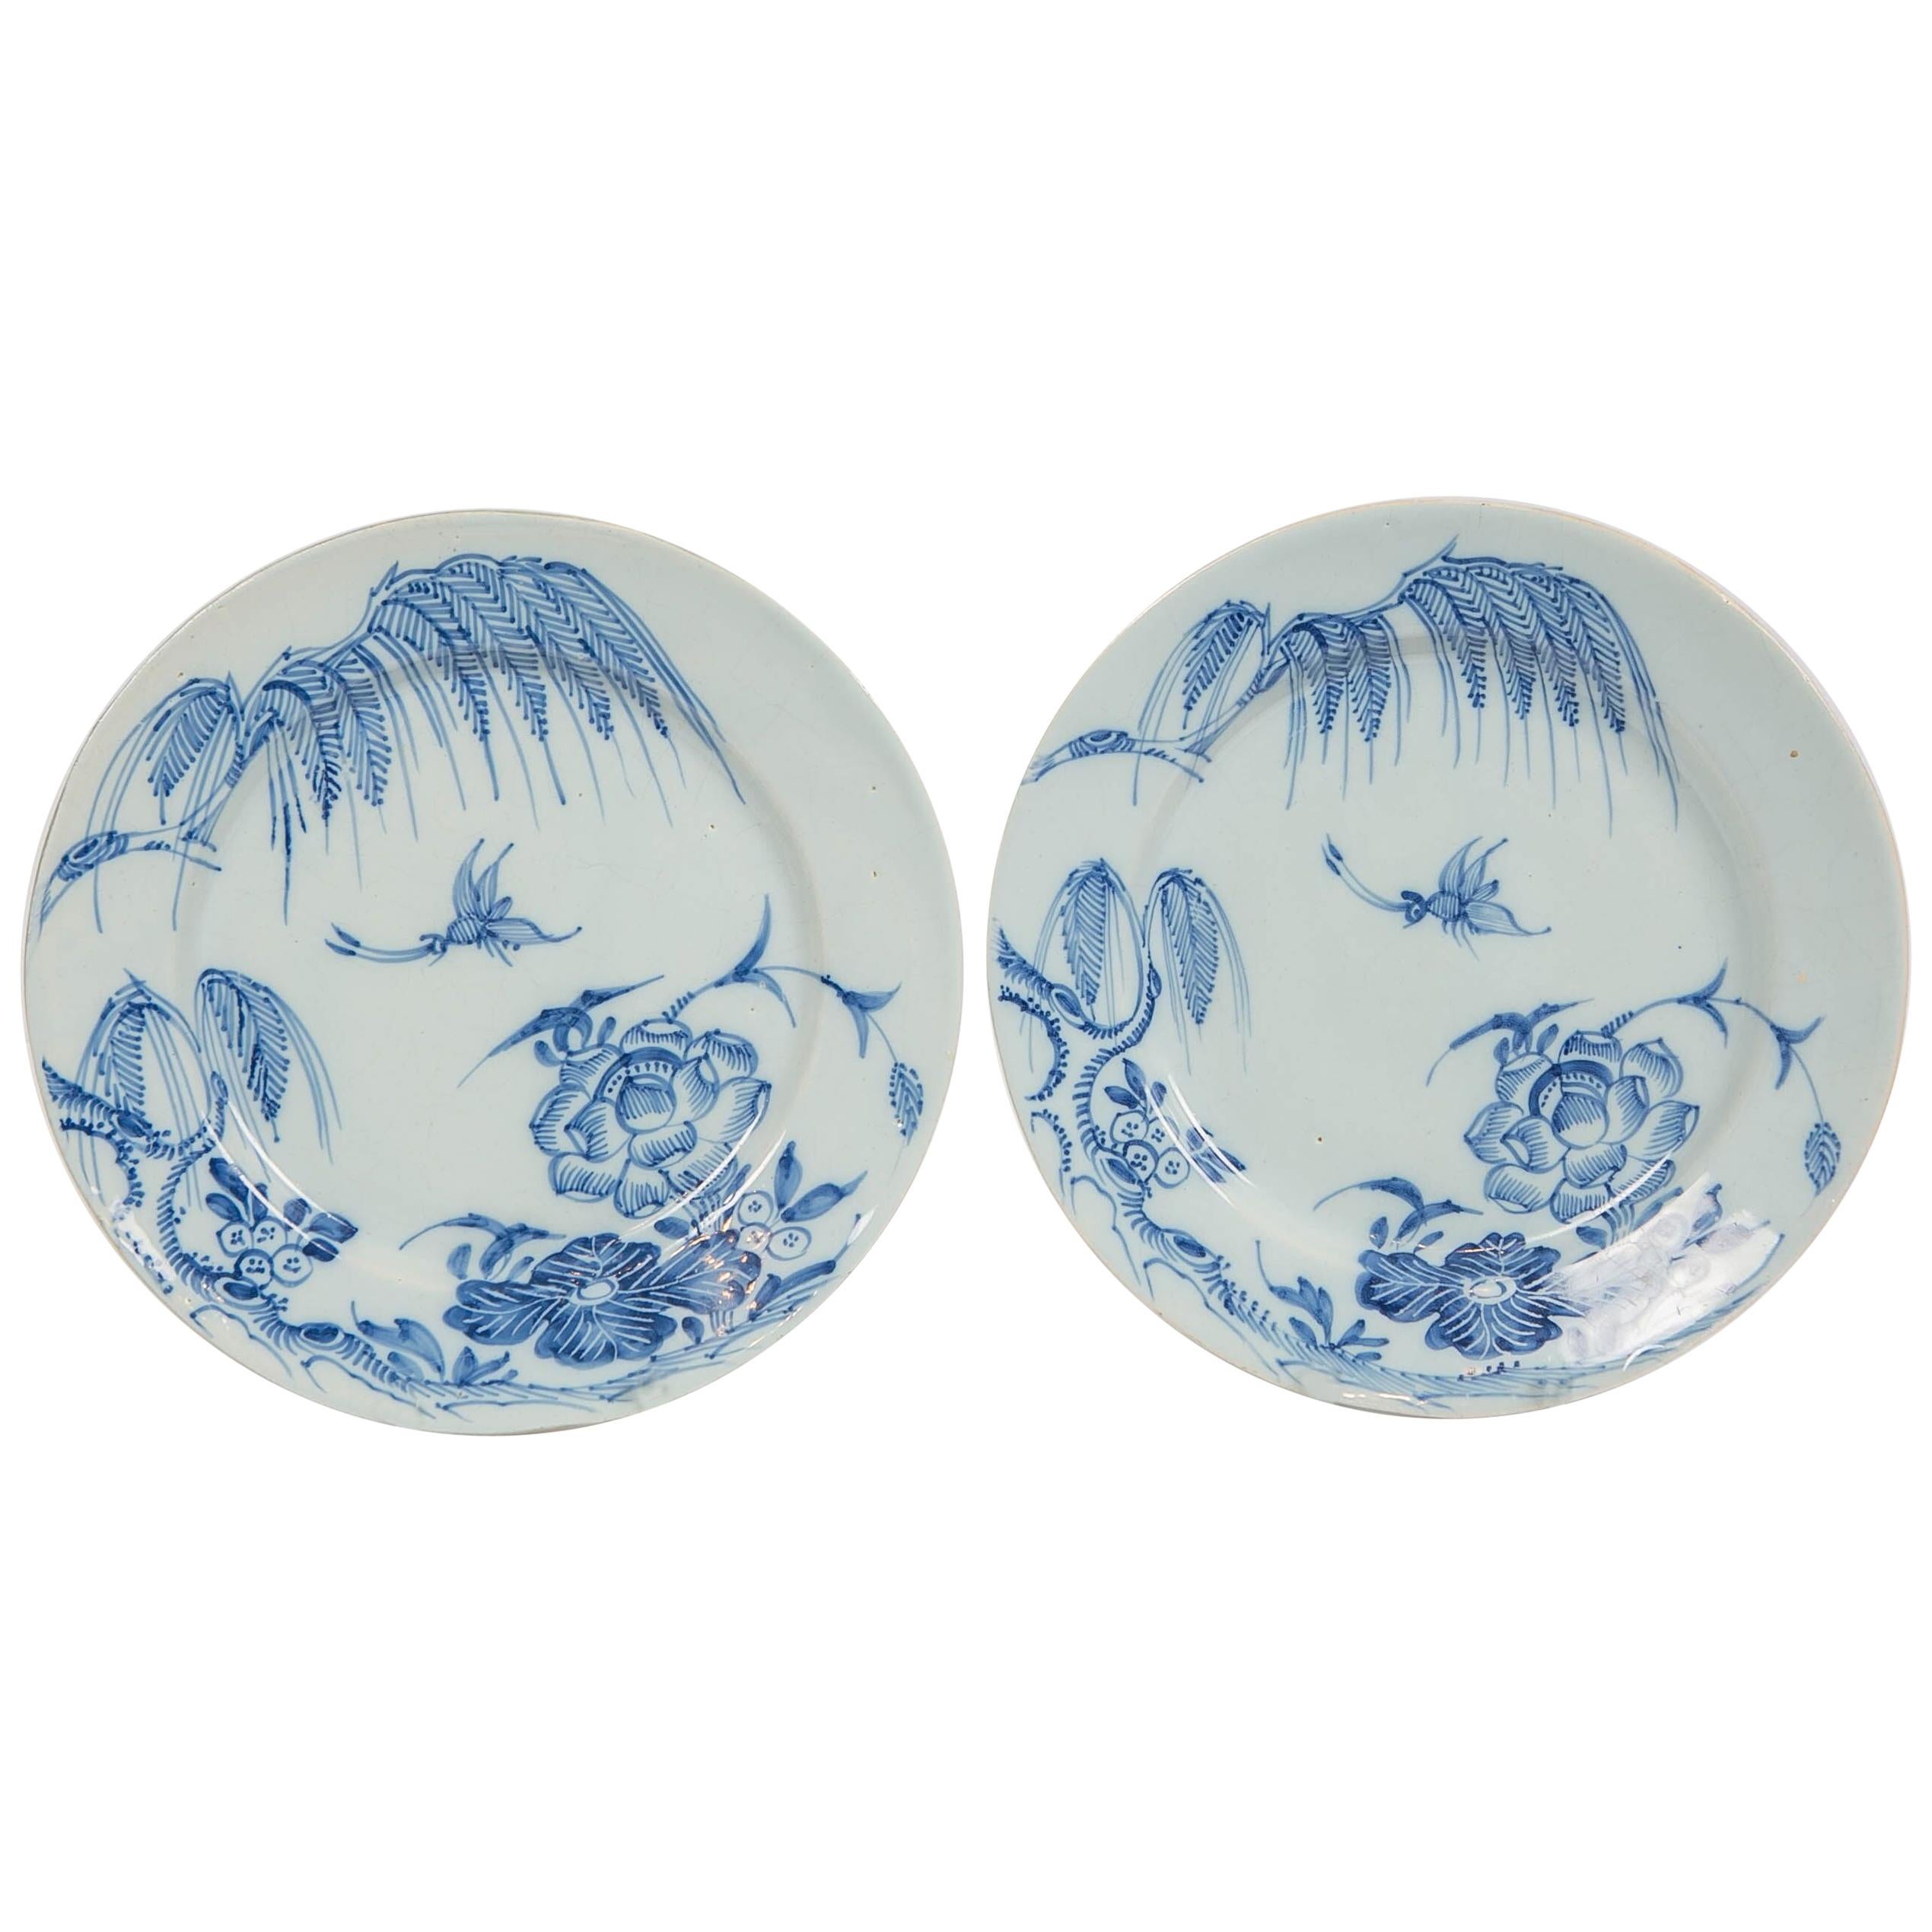  Pair Blue and White Delft Plates 18th Century, Made circa 1750